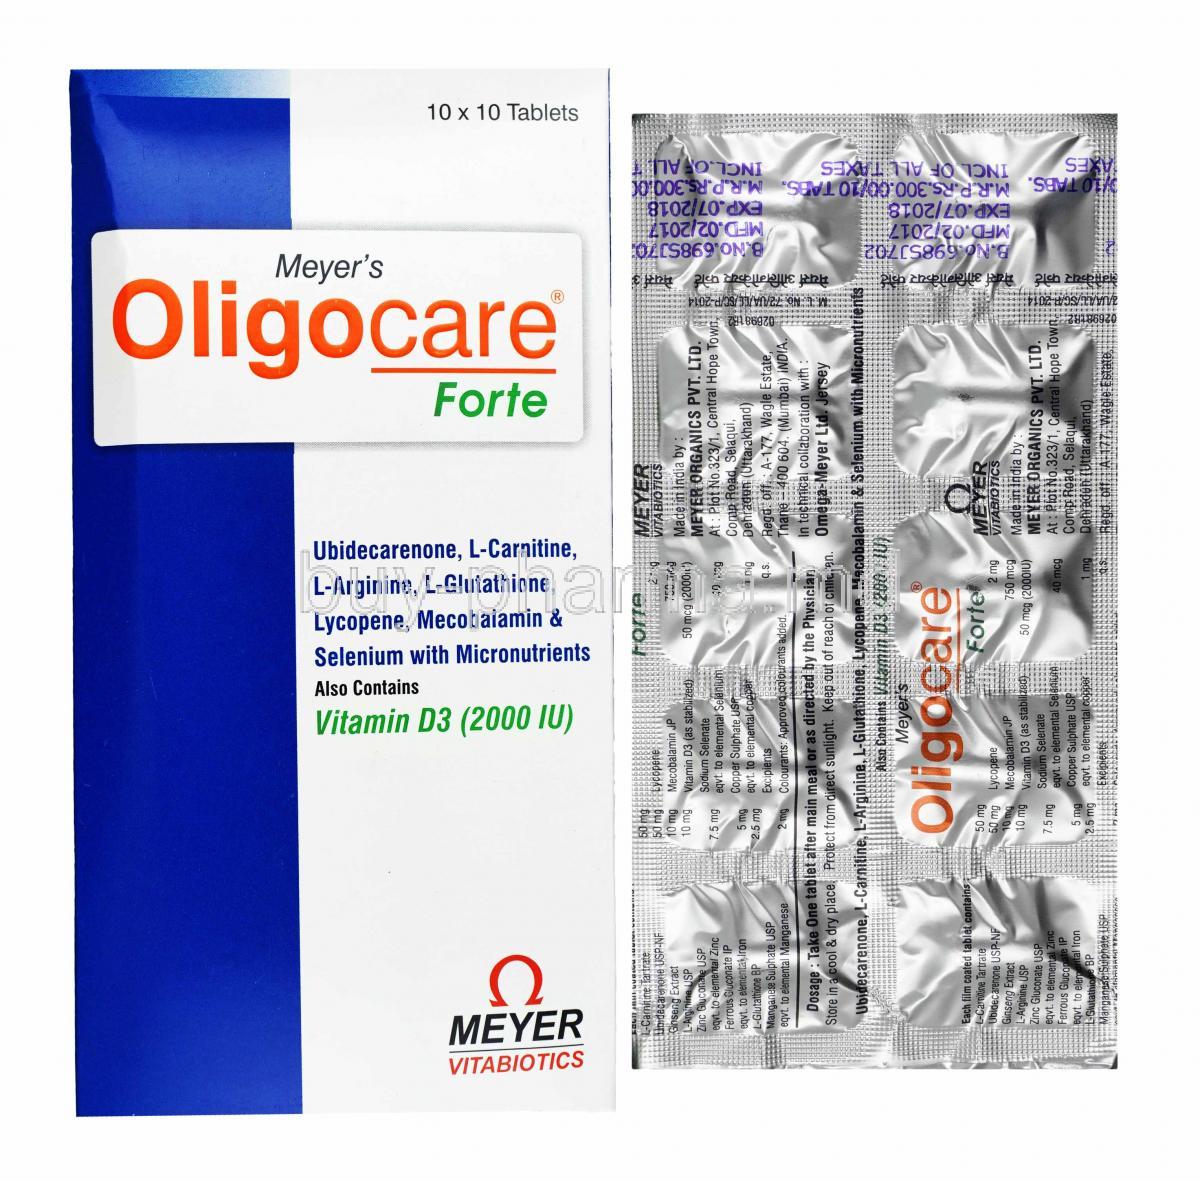 Oligocare Forte box and tablets